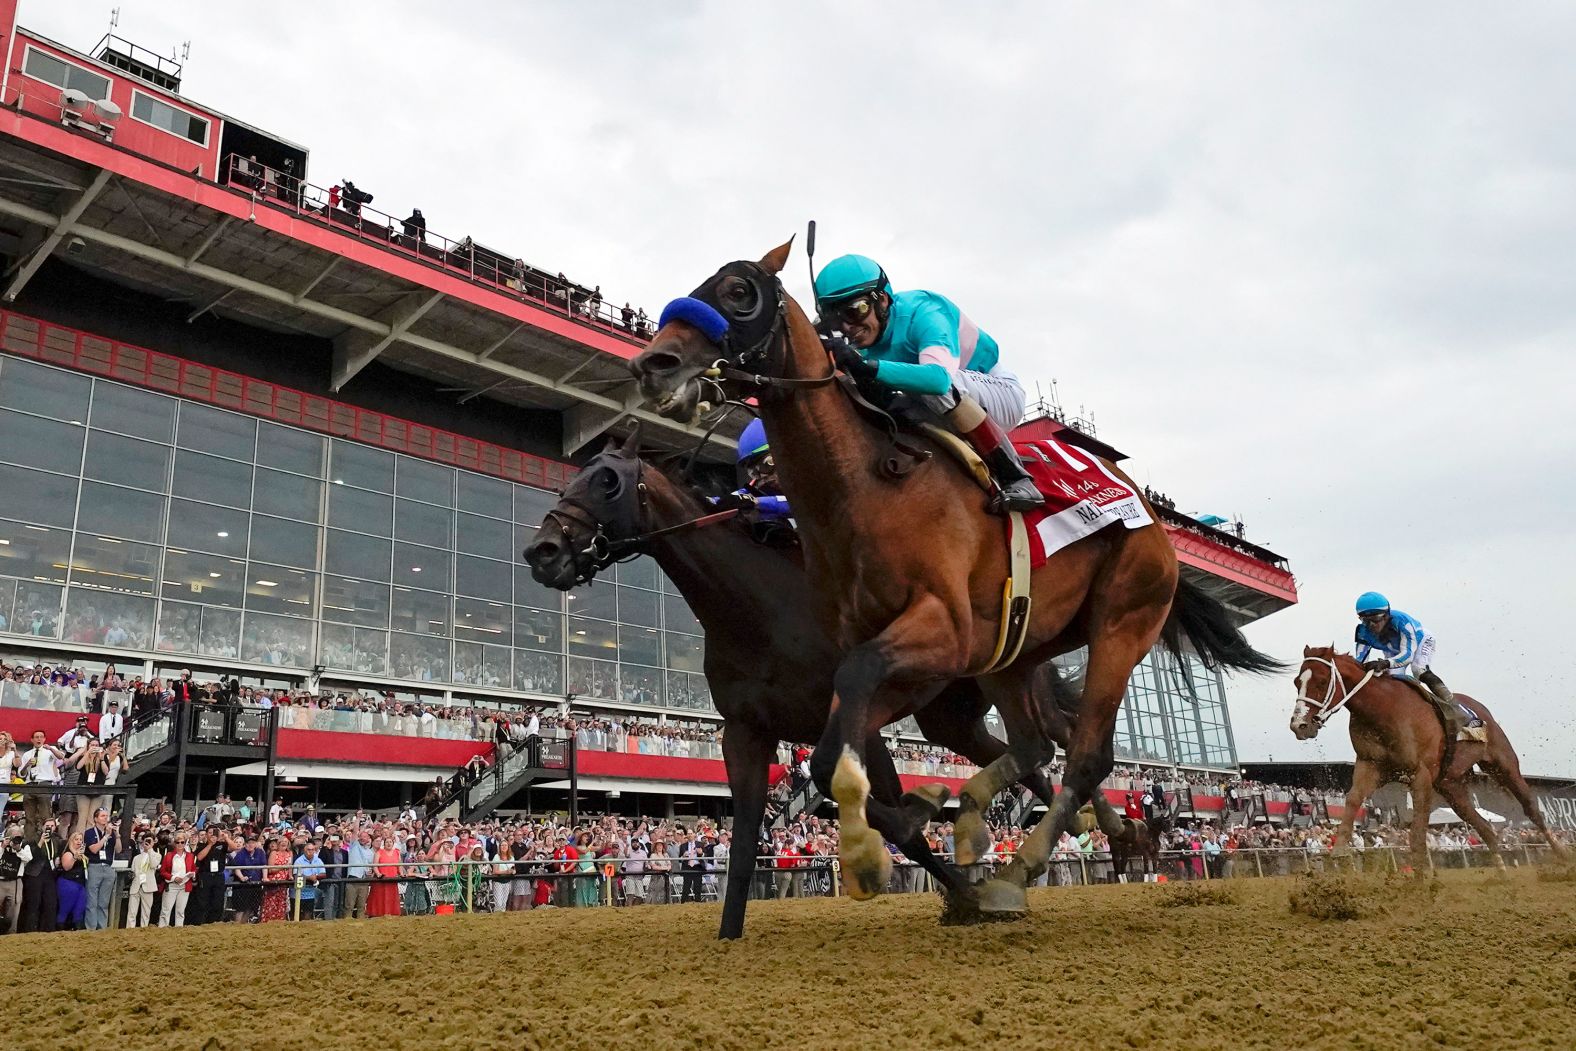 National Treasure, with jockey John Velazquez, edges Blazing Sevens <a href="index.php?page=&url=https%3A%2F%2Fwww.cnn.com%2F2023%2F05%2F20%2Fsport%2Fpreakness-results-national-treasure%2Findex.html" target="_blank">to win the Preakness Stakes</a> in Baltimore on Saturday, May 20.